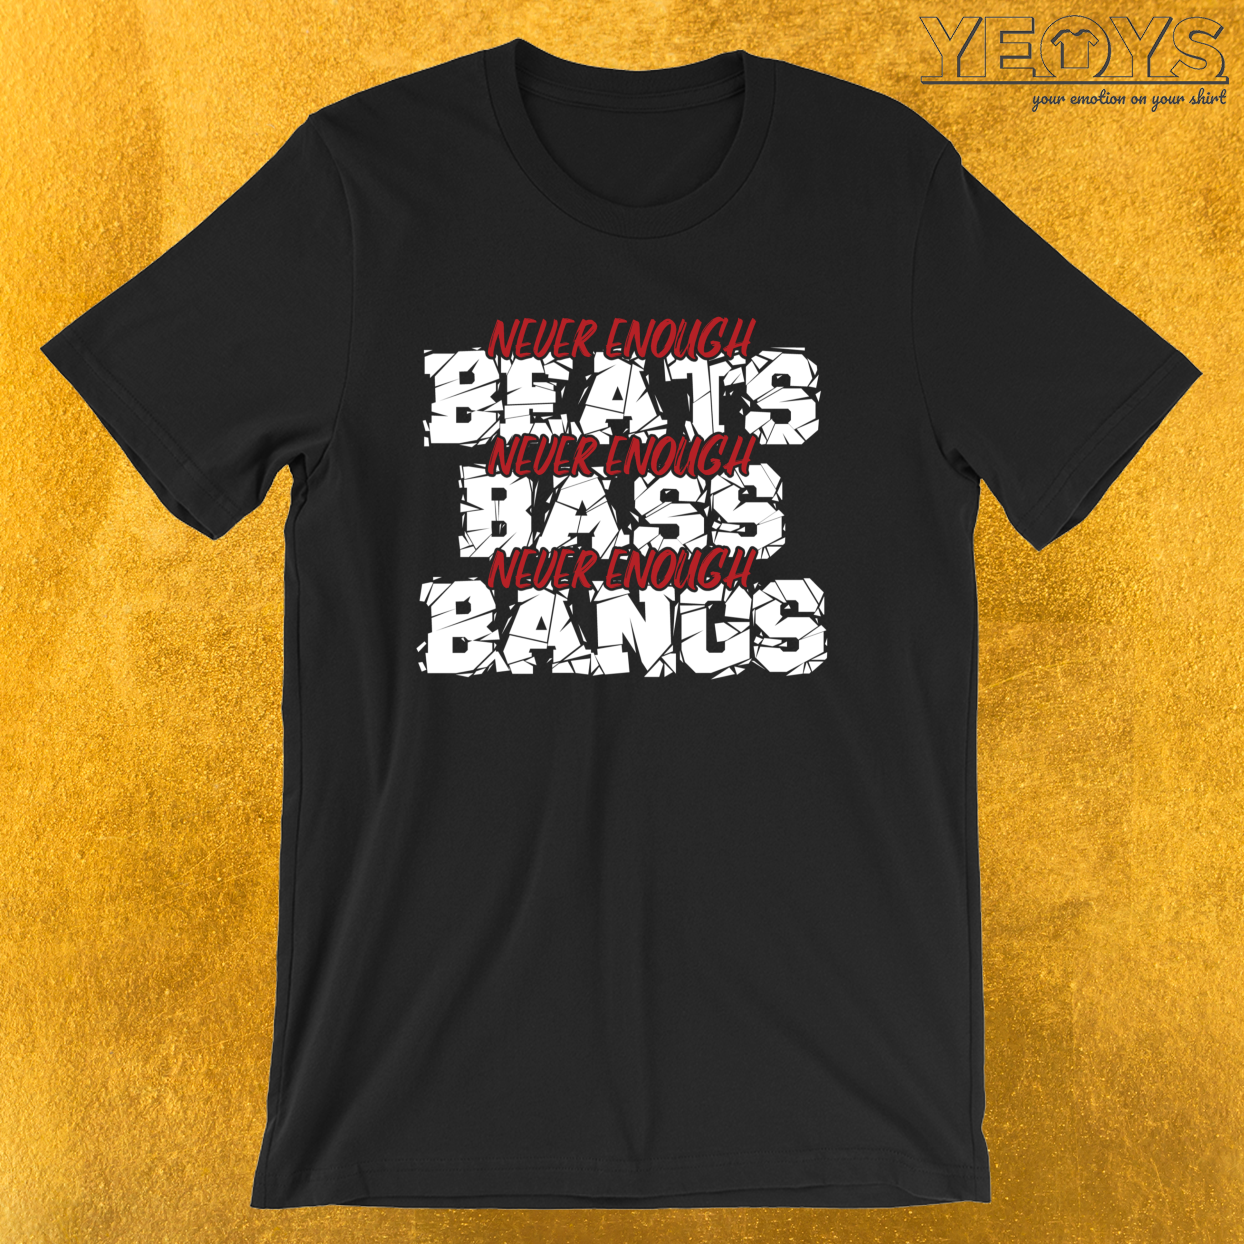 Never Enough Beats Never Enough Bass Never Enough Bangs – Dubstep Quotes Tee